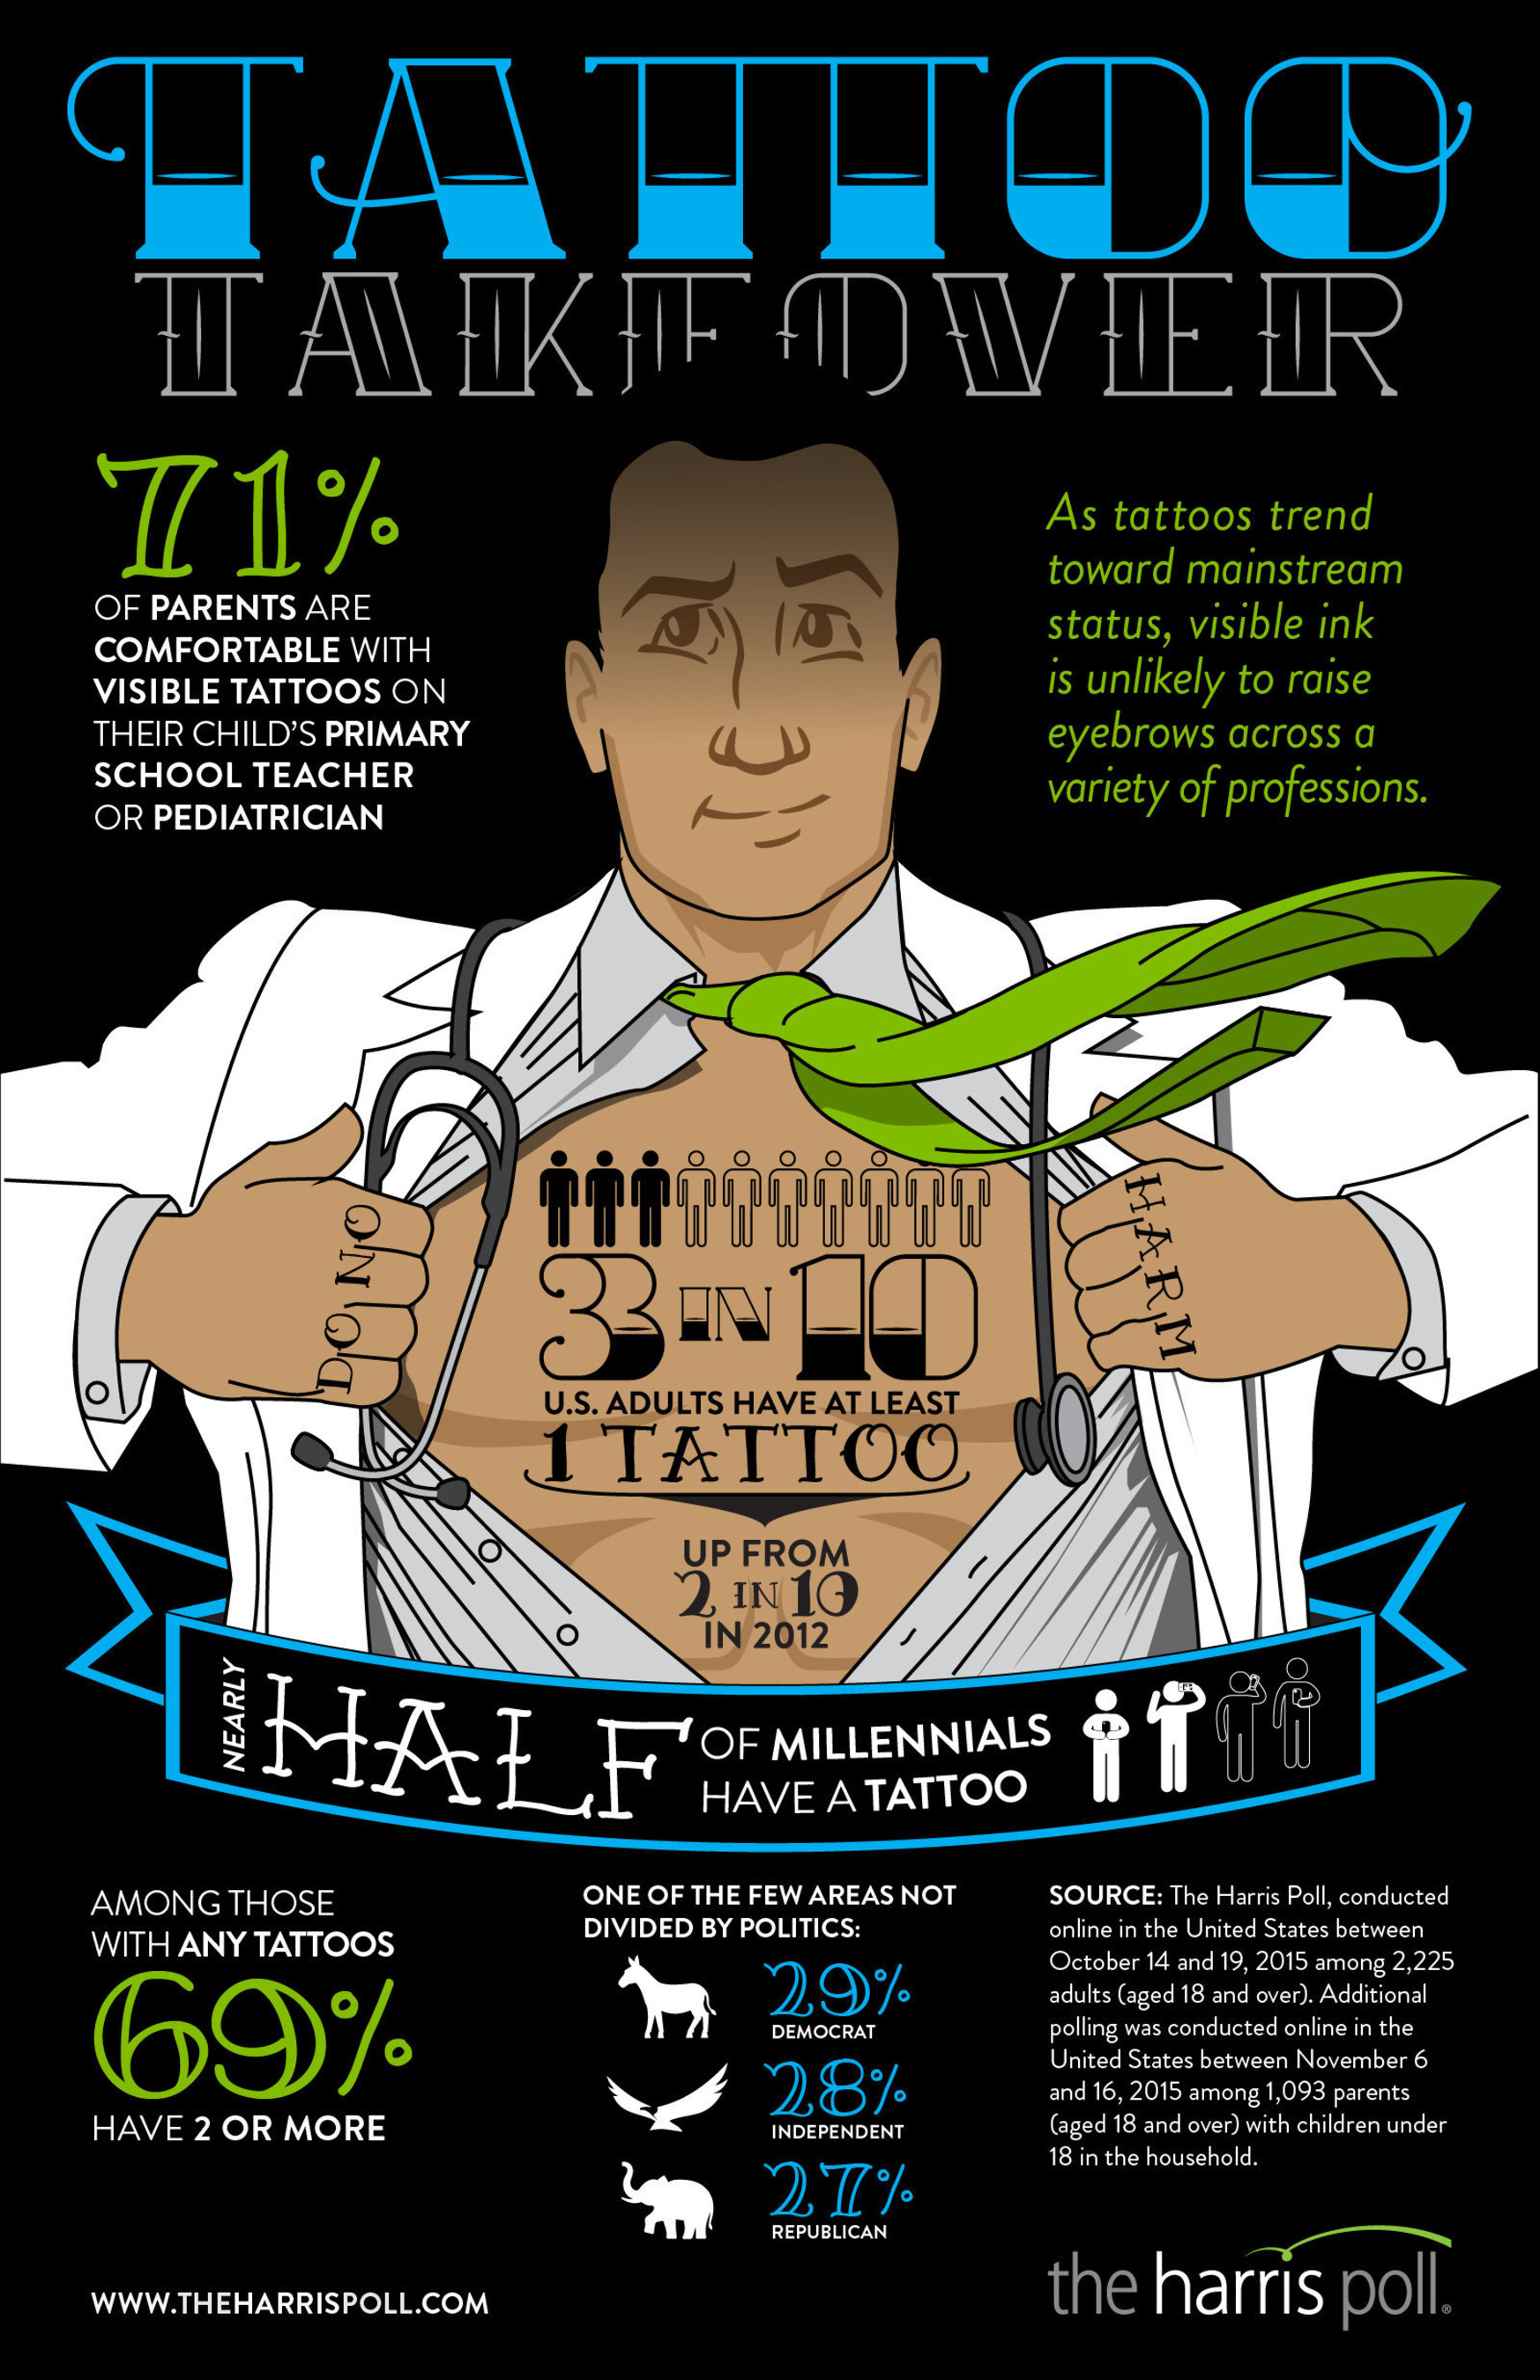 Tattoos Trending Toward the Mainstream: 3 in 10 Americans Have Tattoos, and Few Stop at Just One